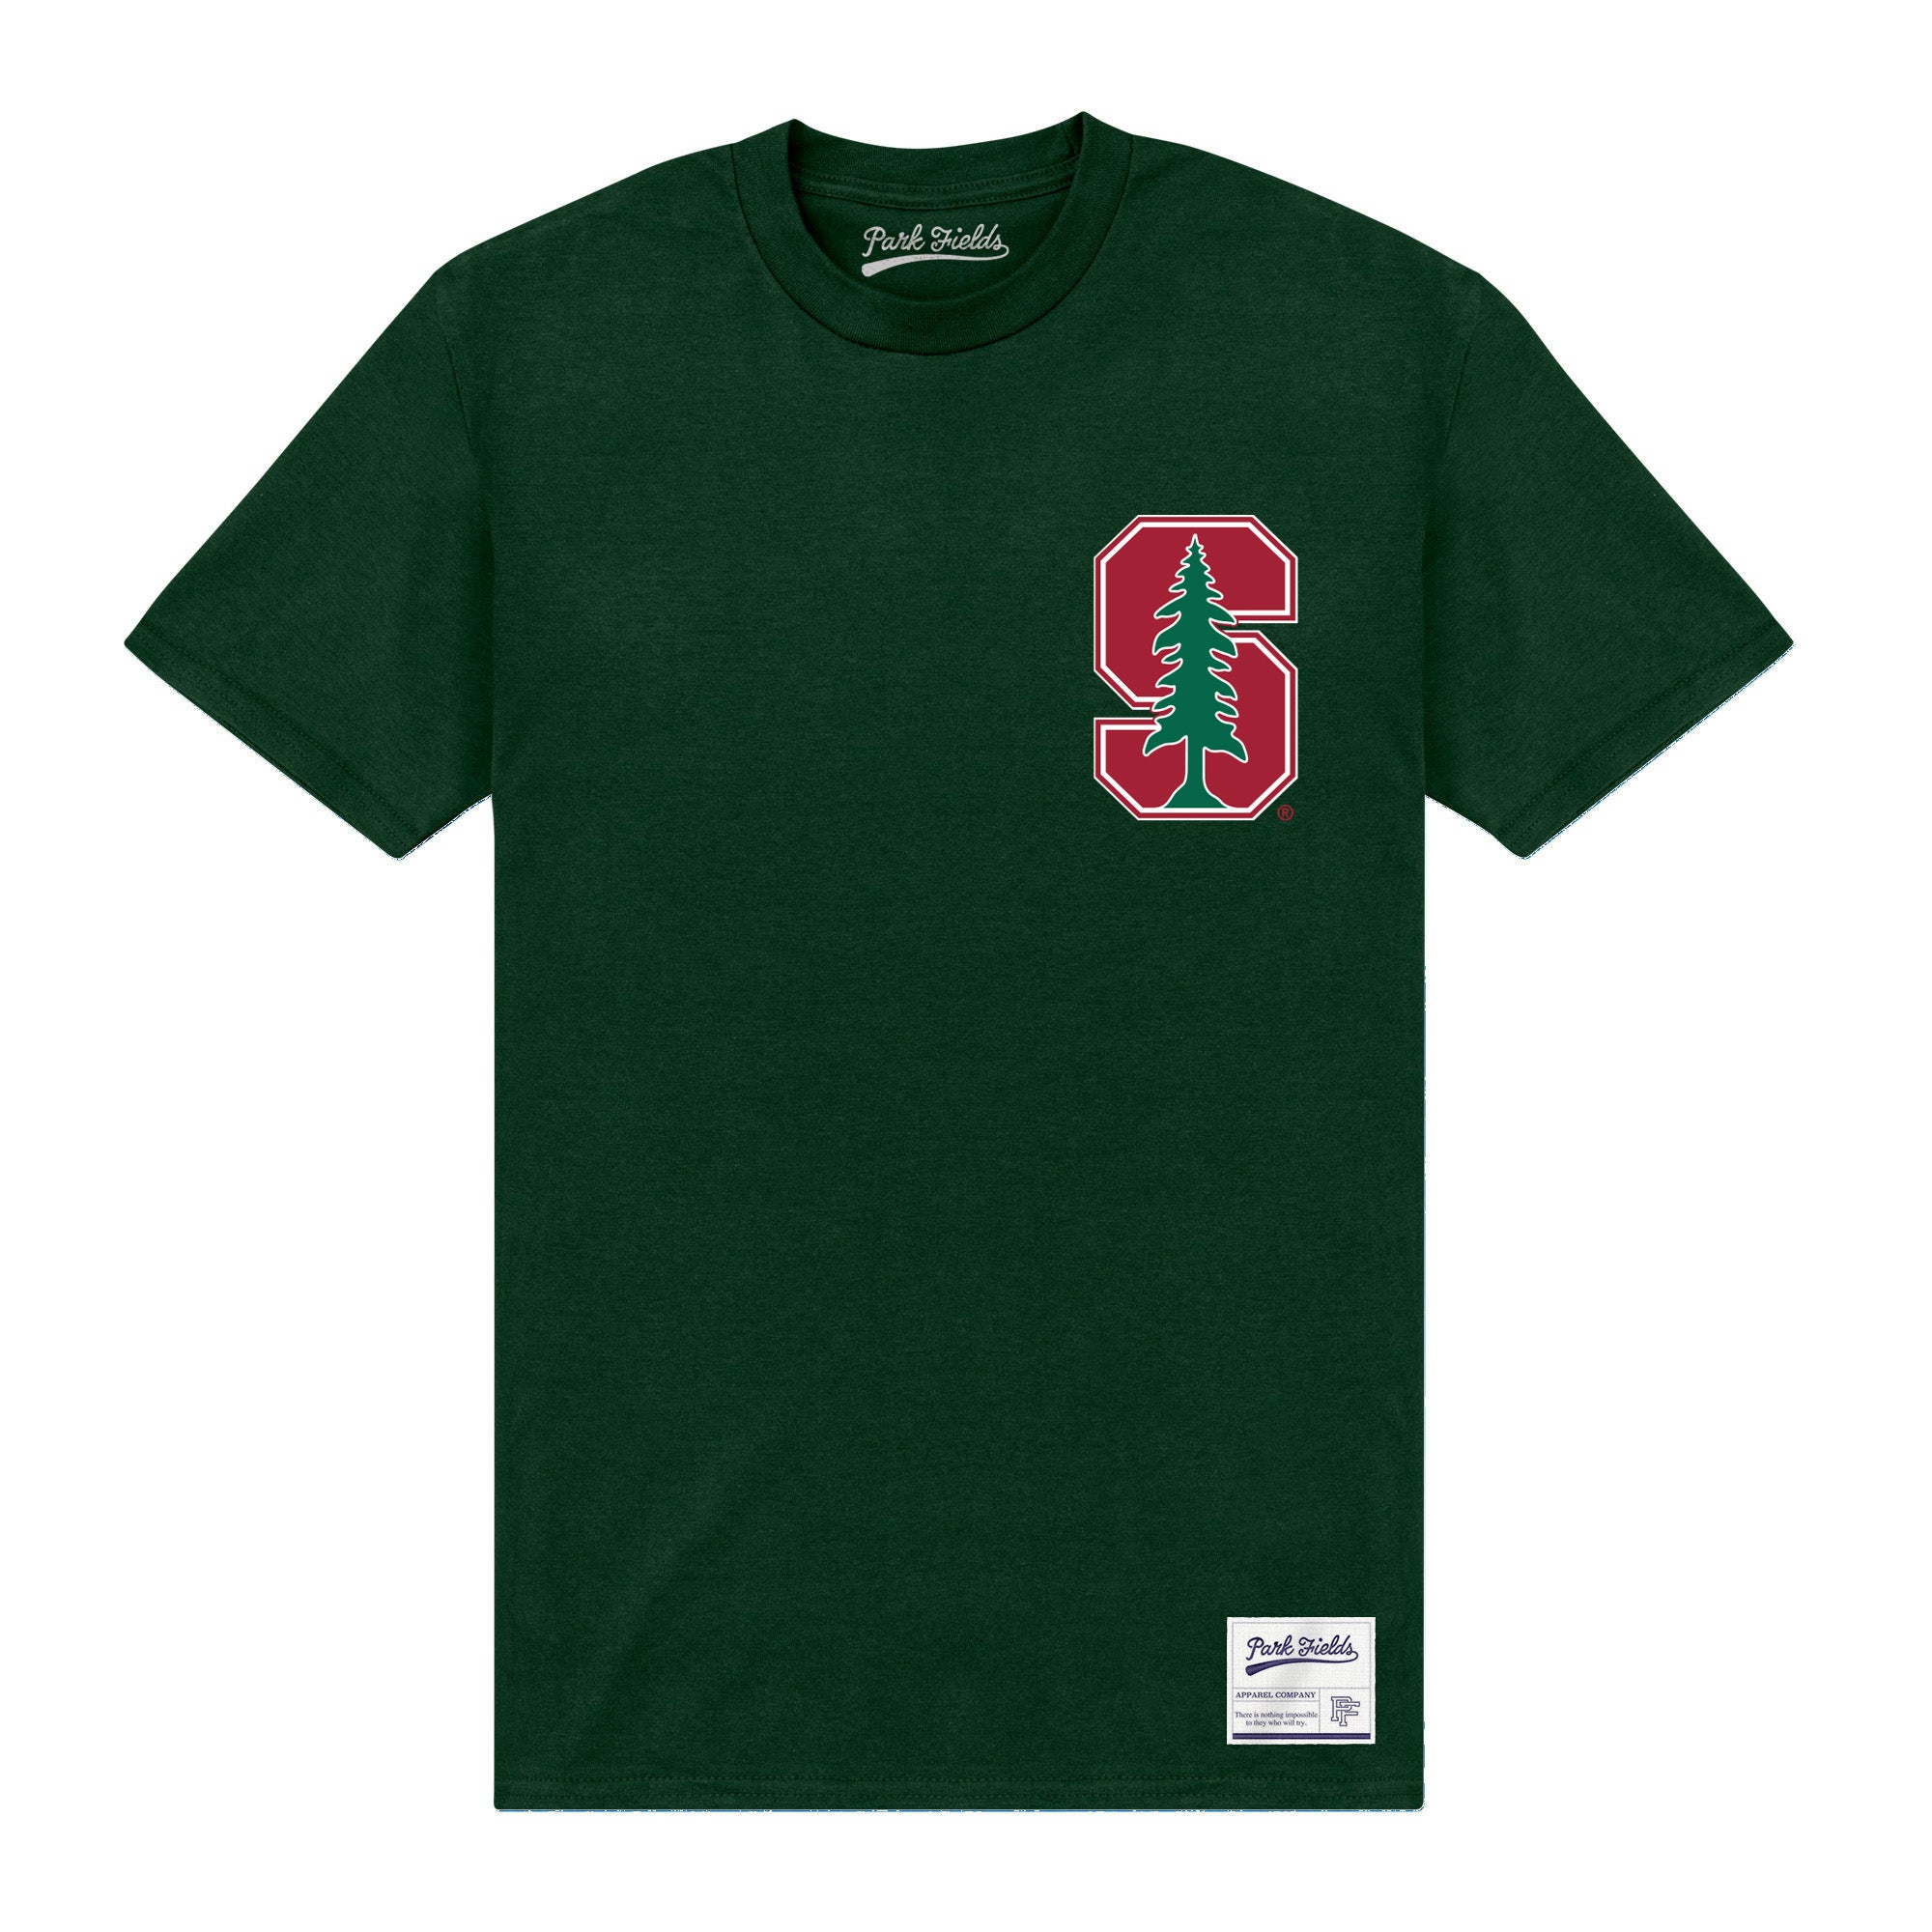 Official Stanford University S Forest T-Shirt Crew Short Sleeve T Shirt Tee Top